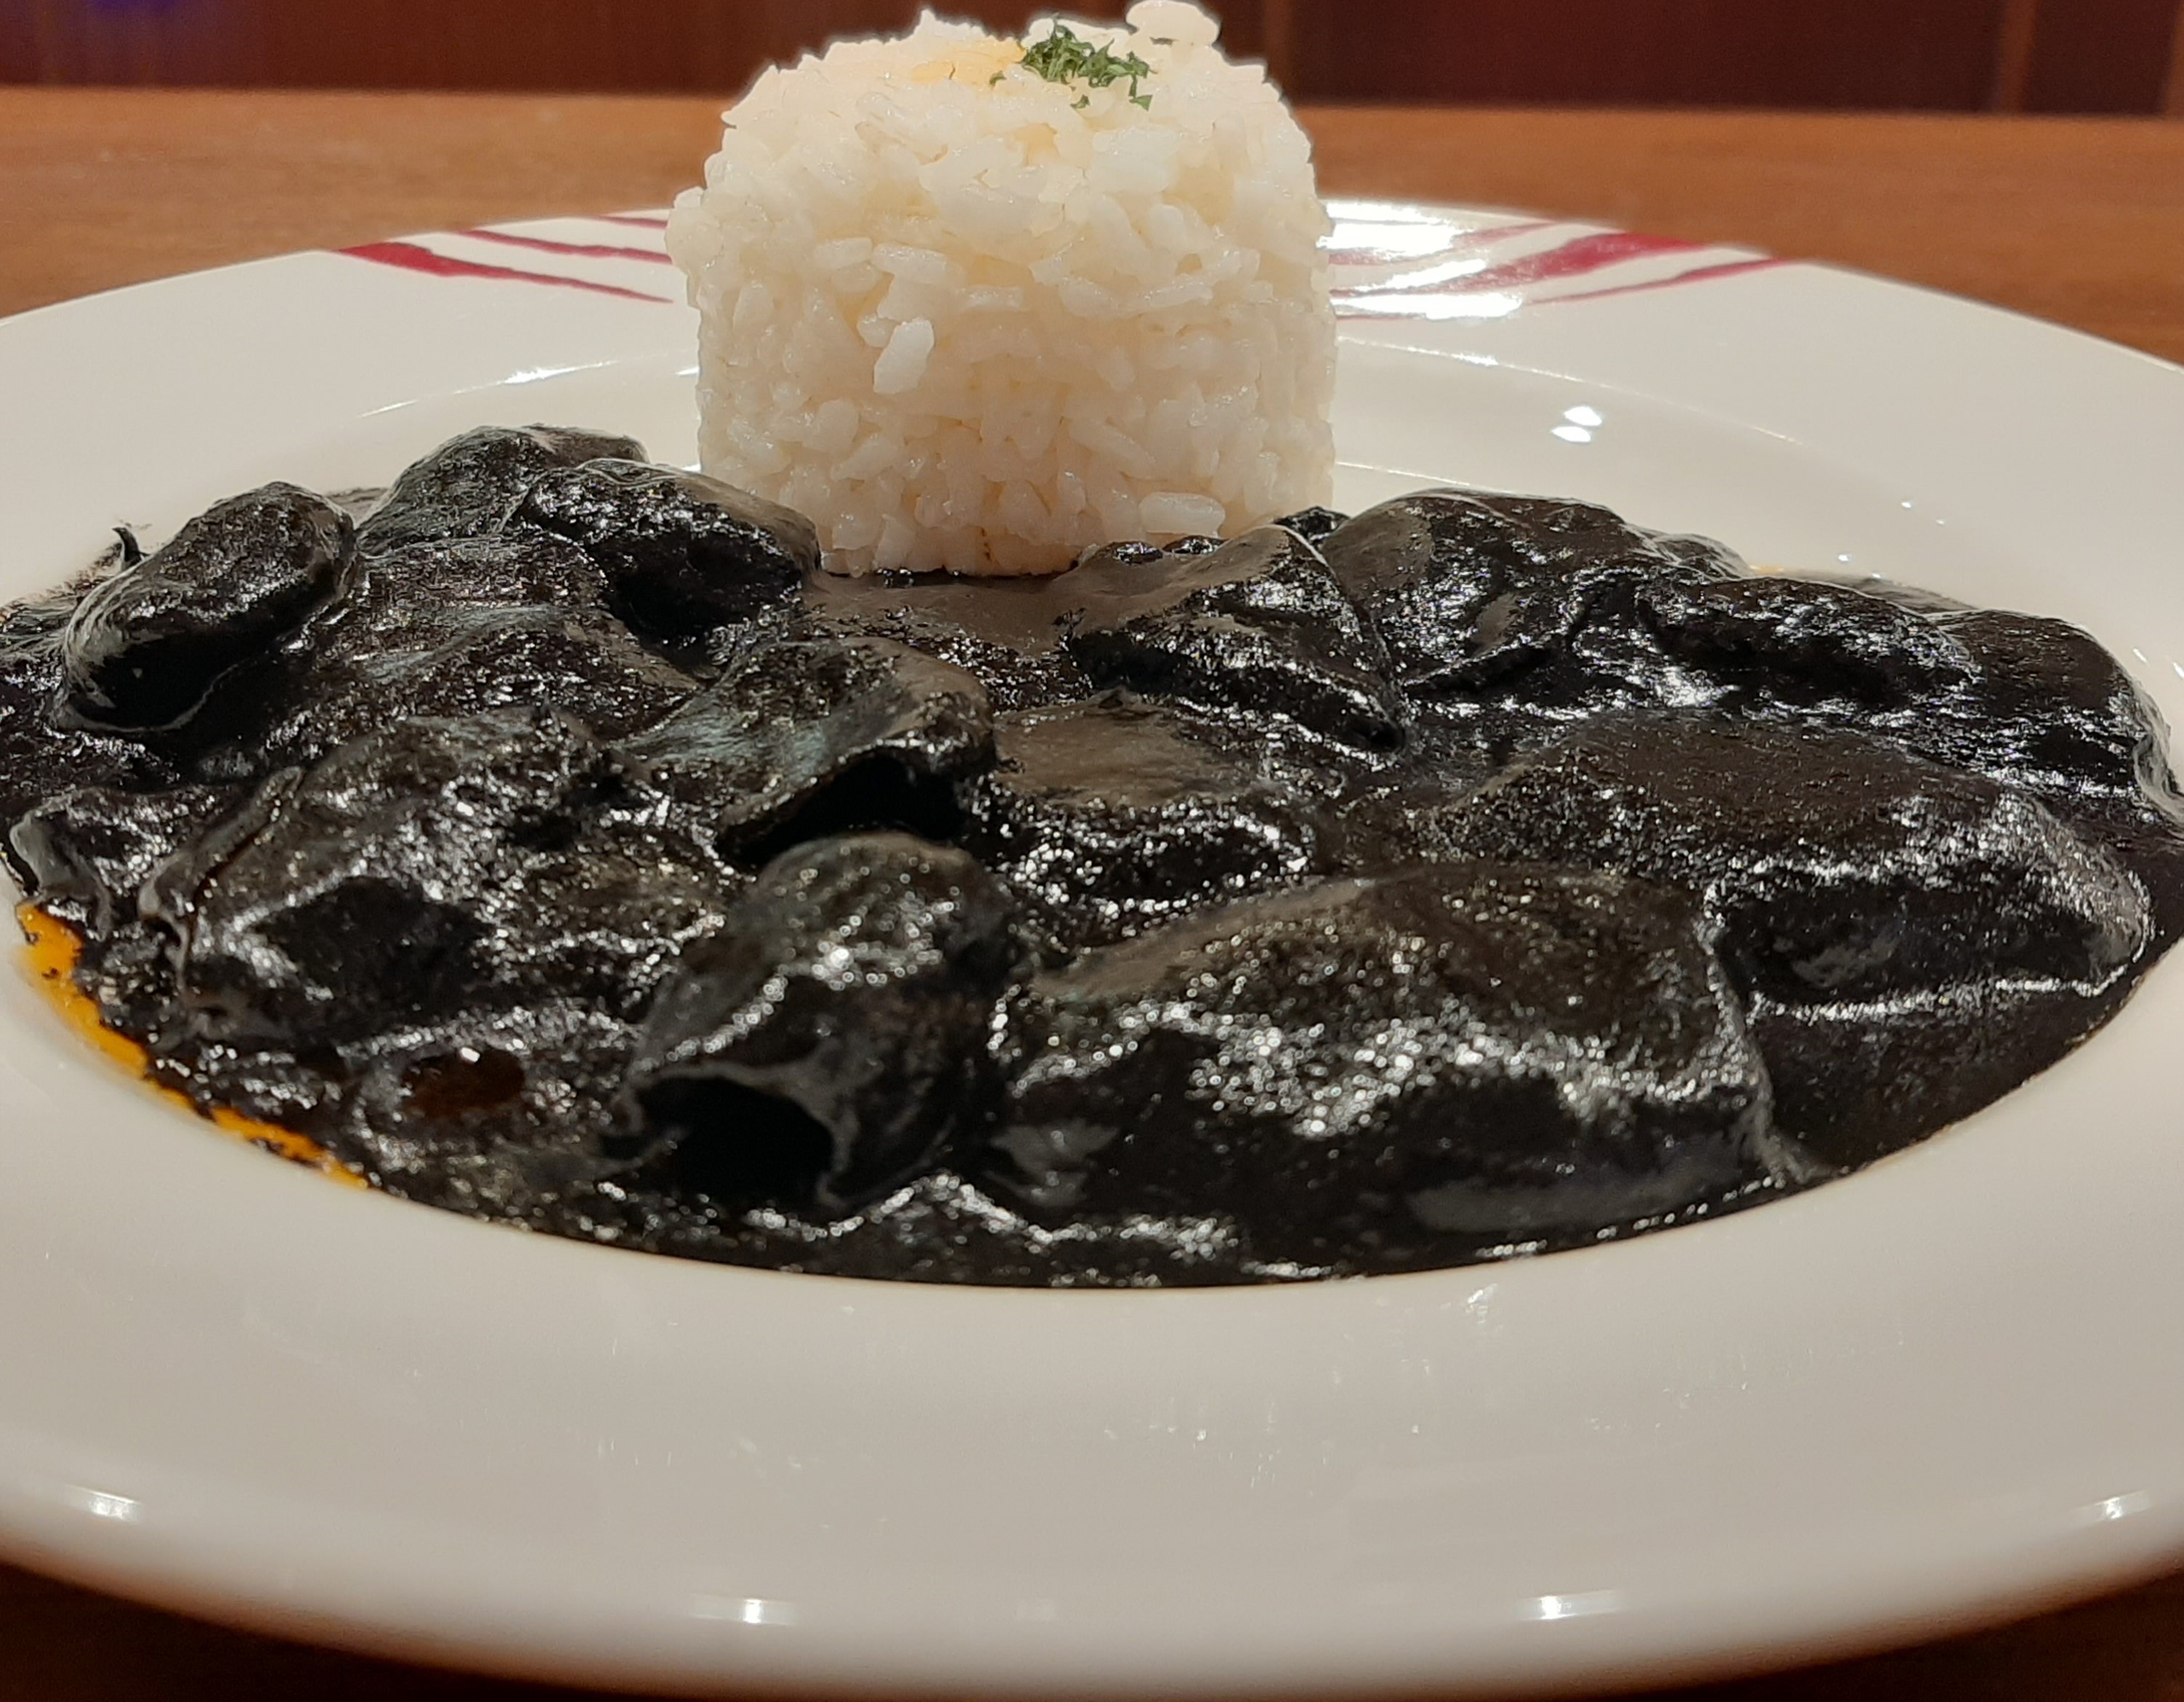 Squid cooked in its ink with rice